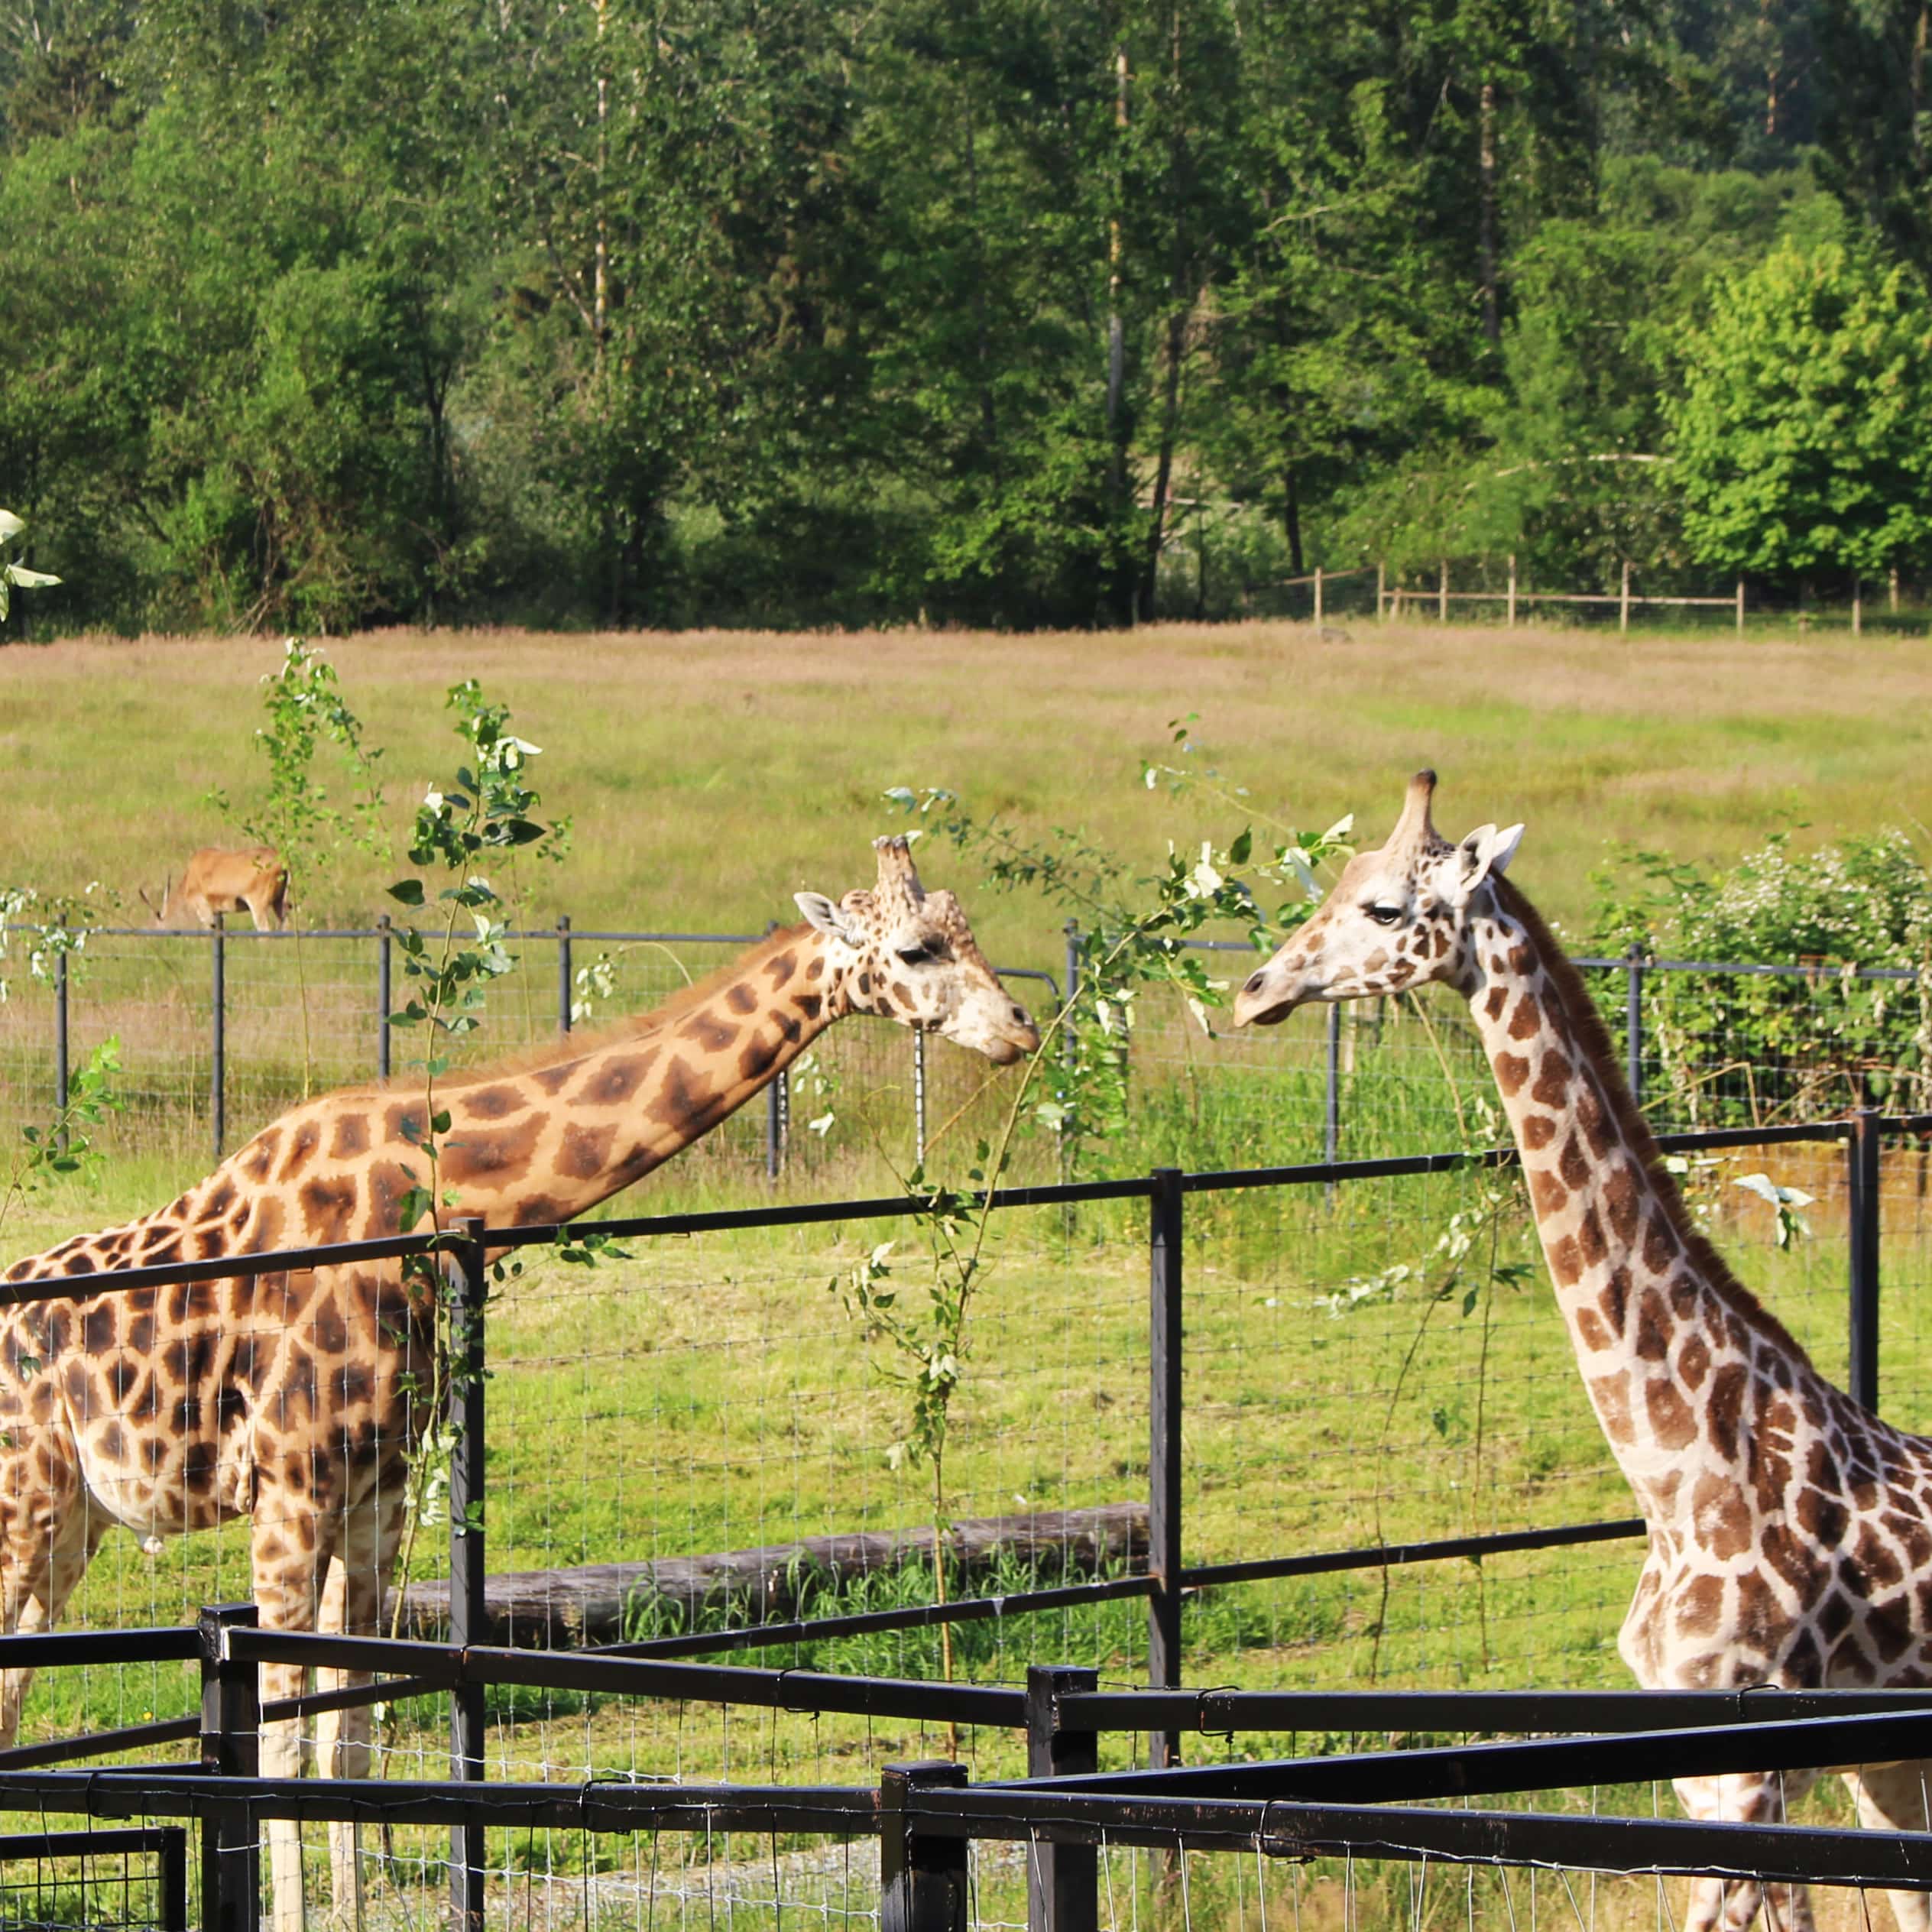 The Greater Vancouver Zoo